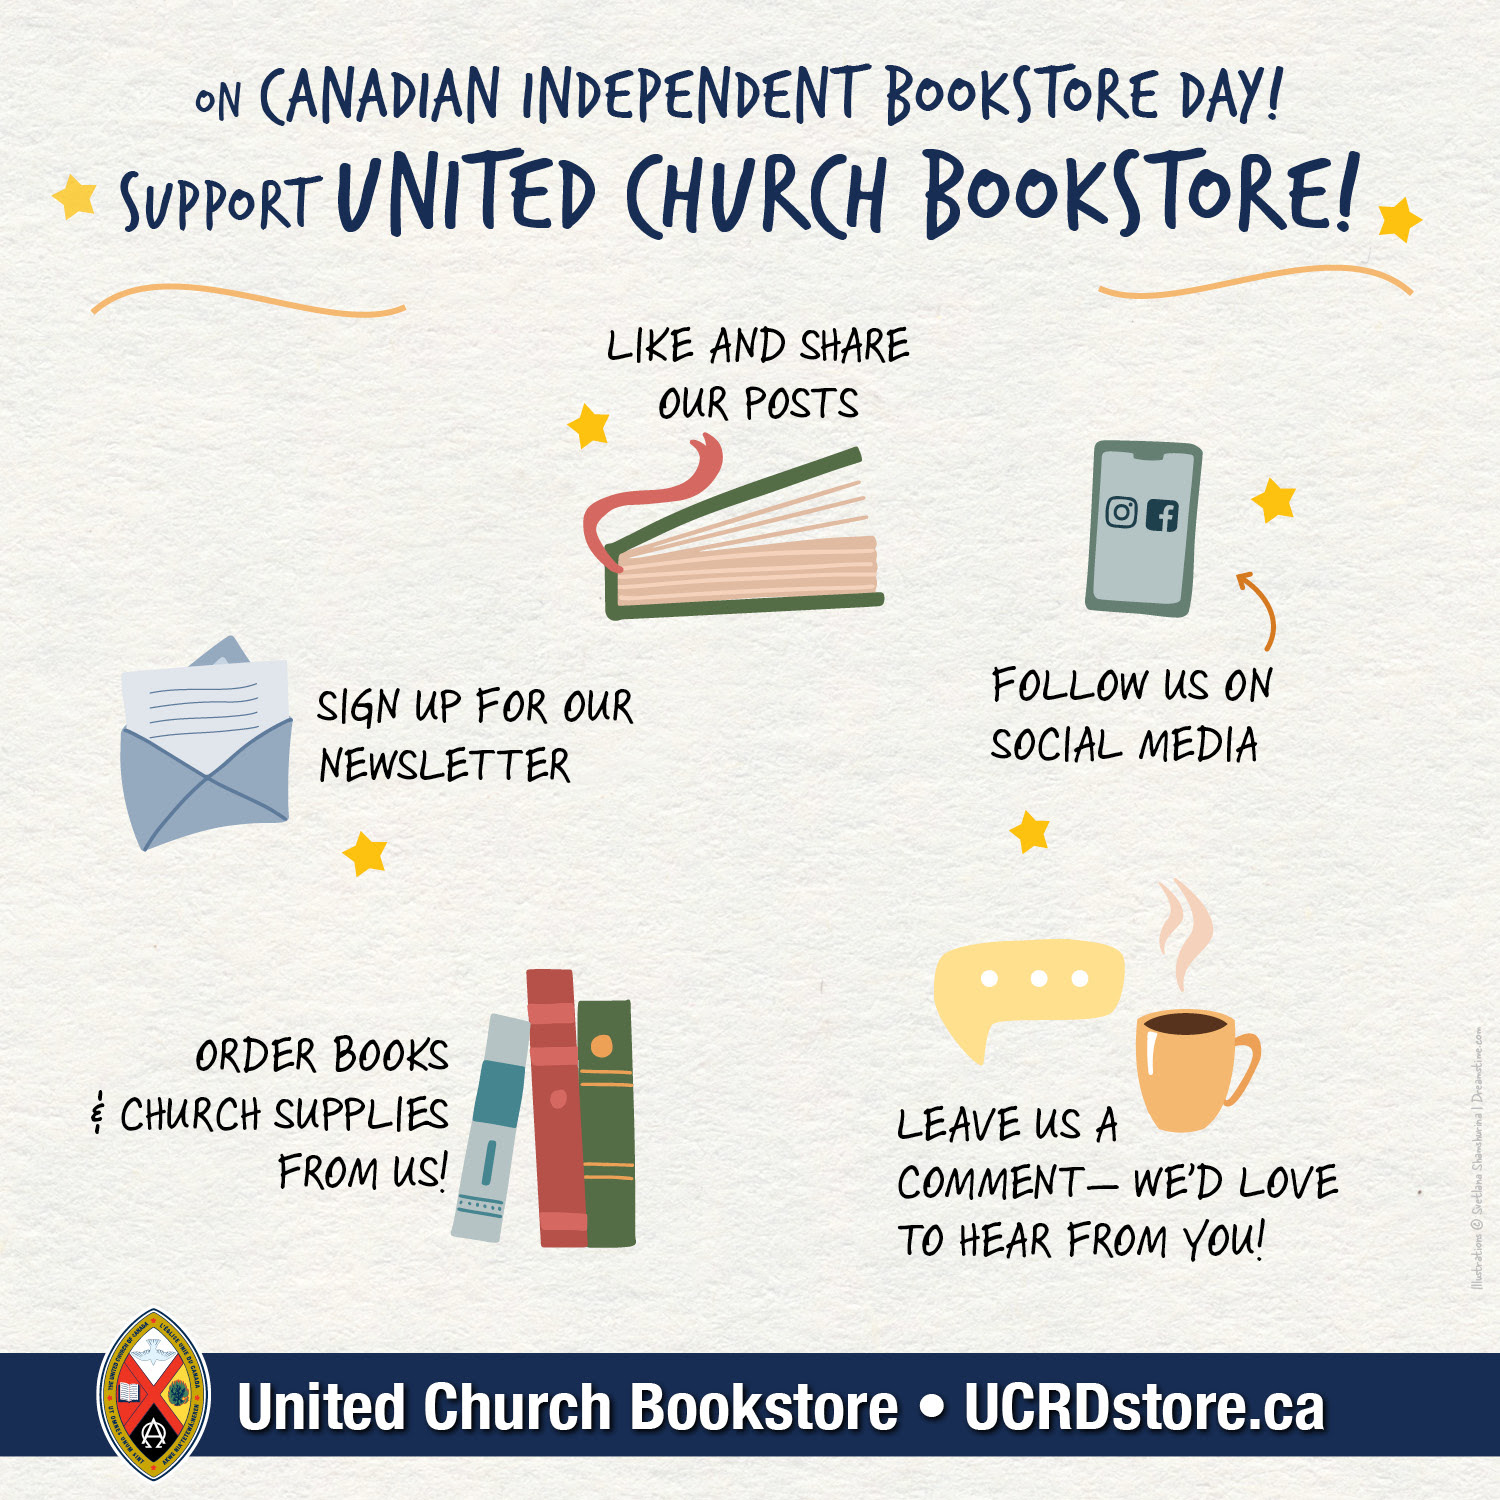 Support the United Church Bookstore